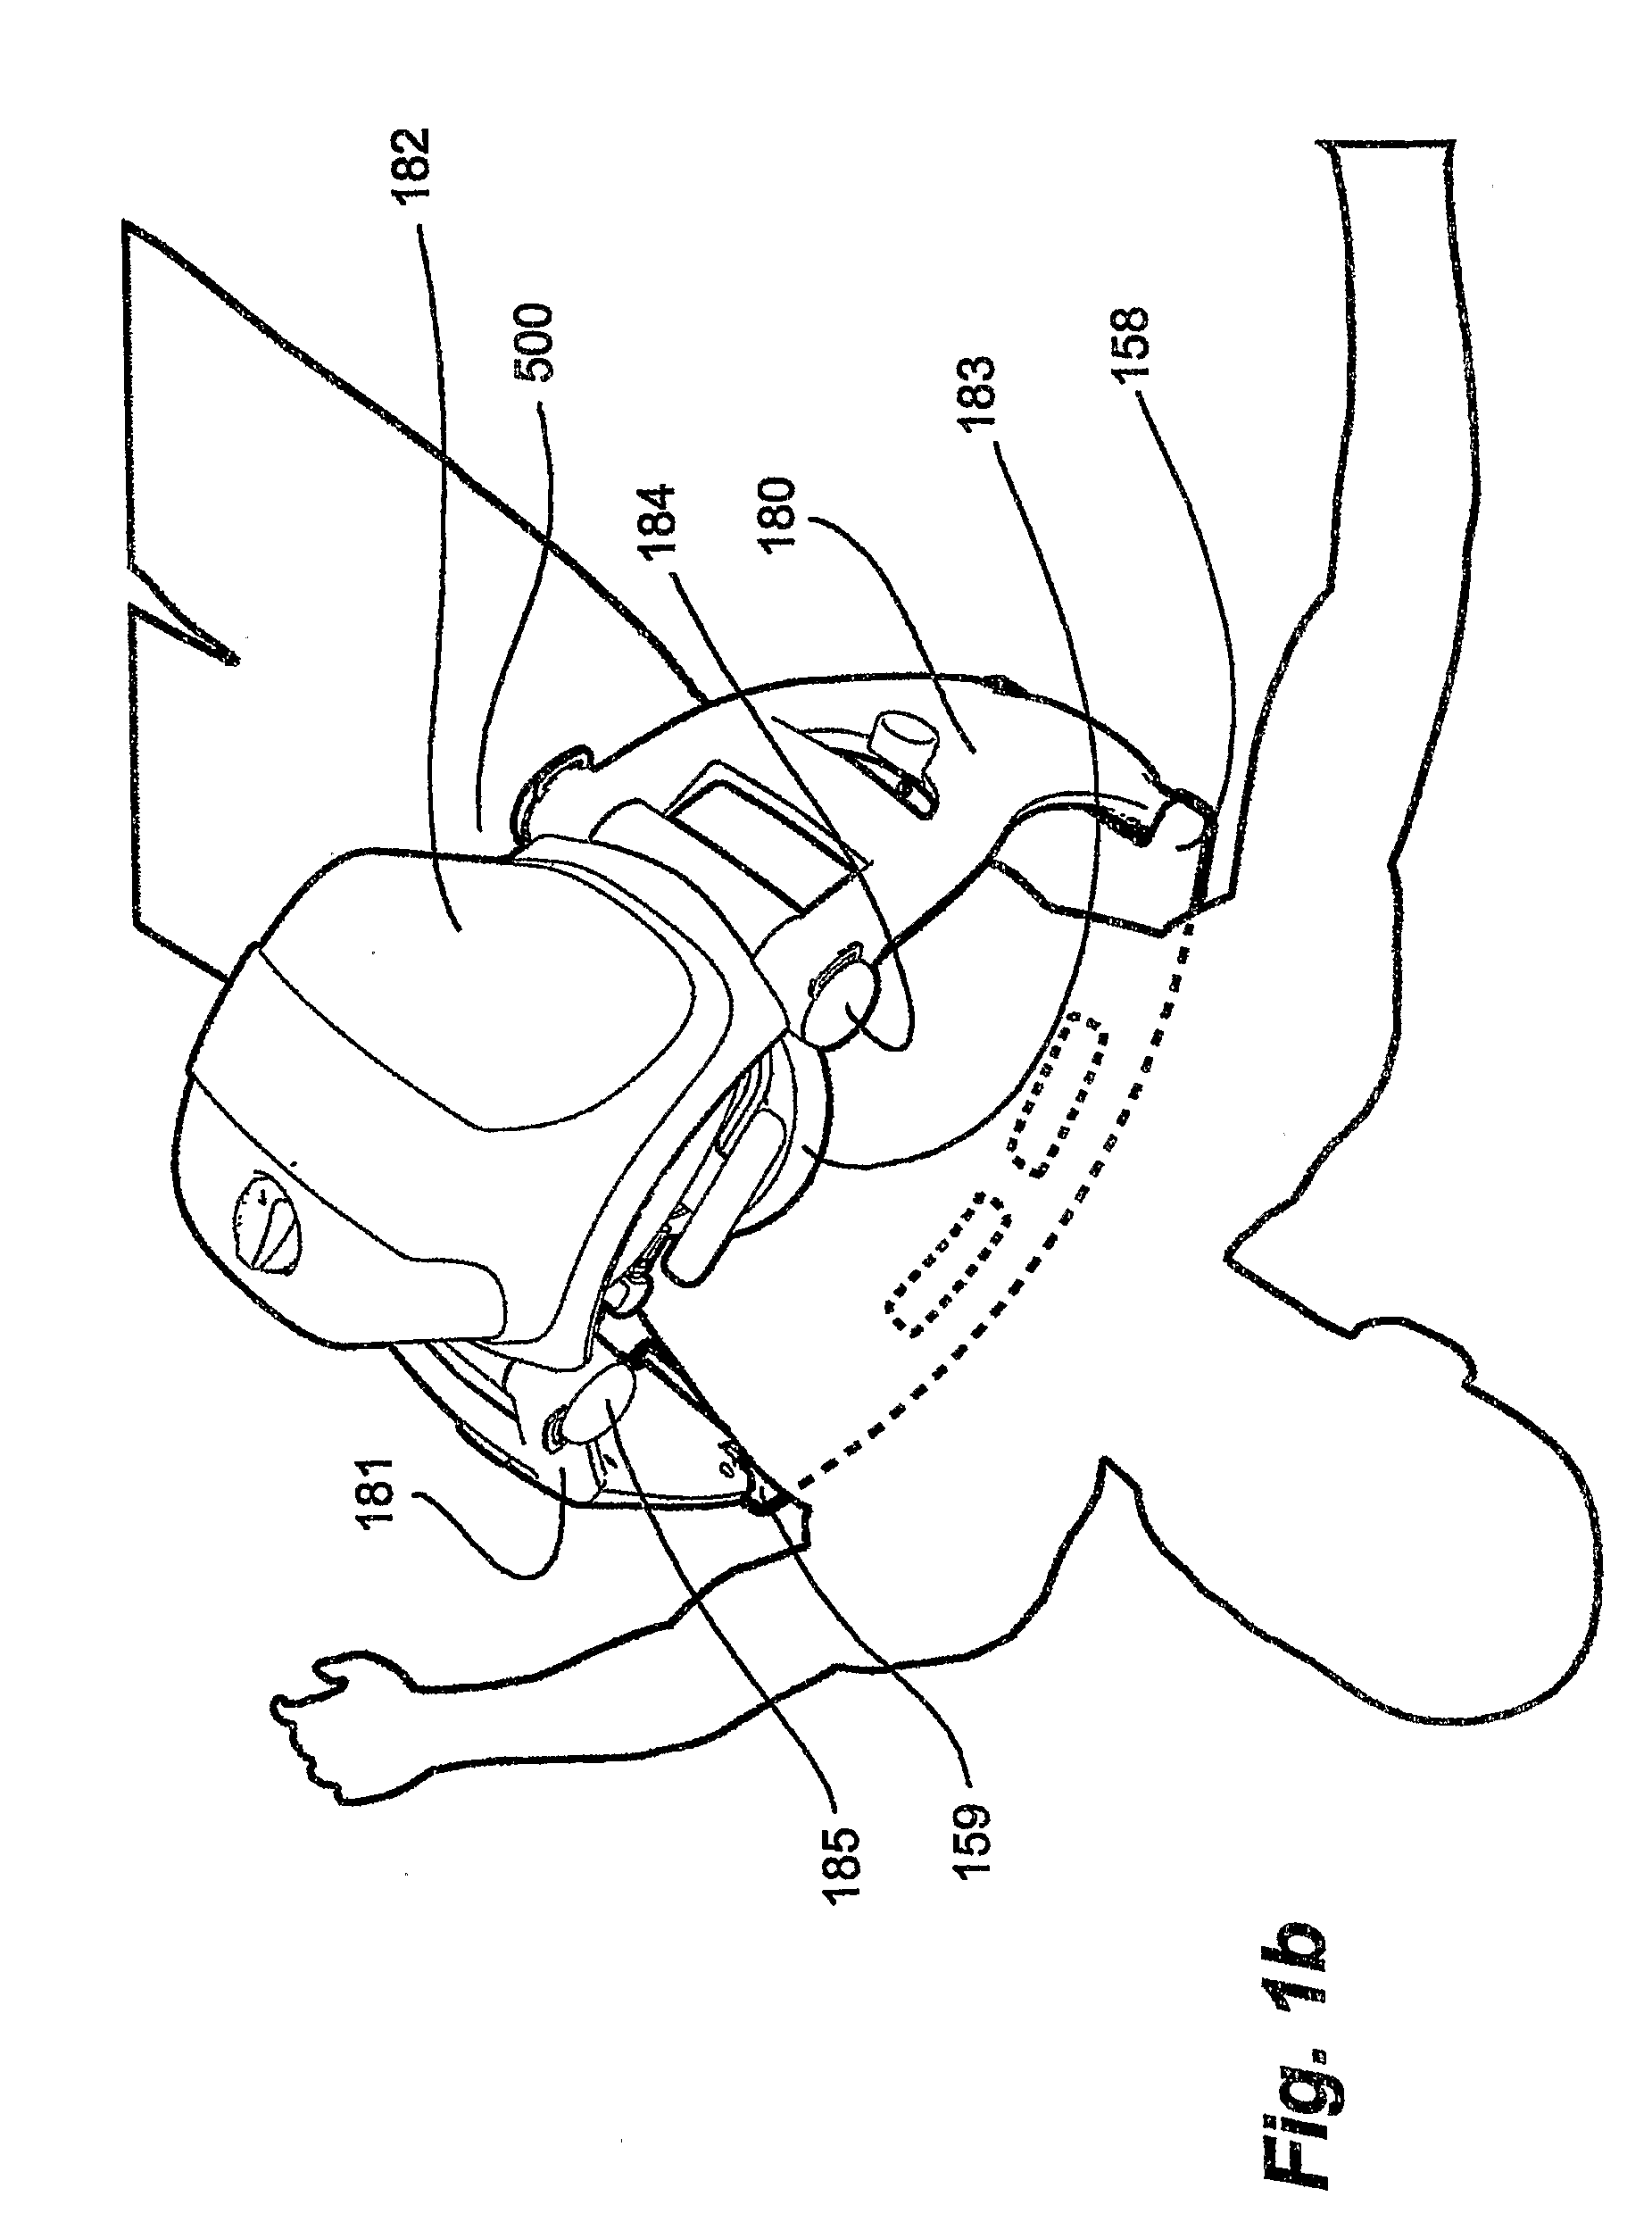 ECG electrode and electrode support